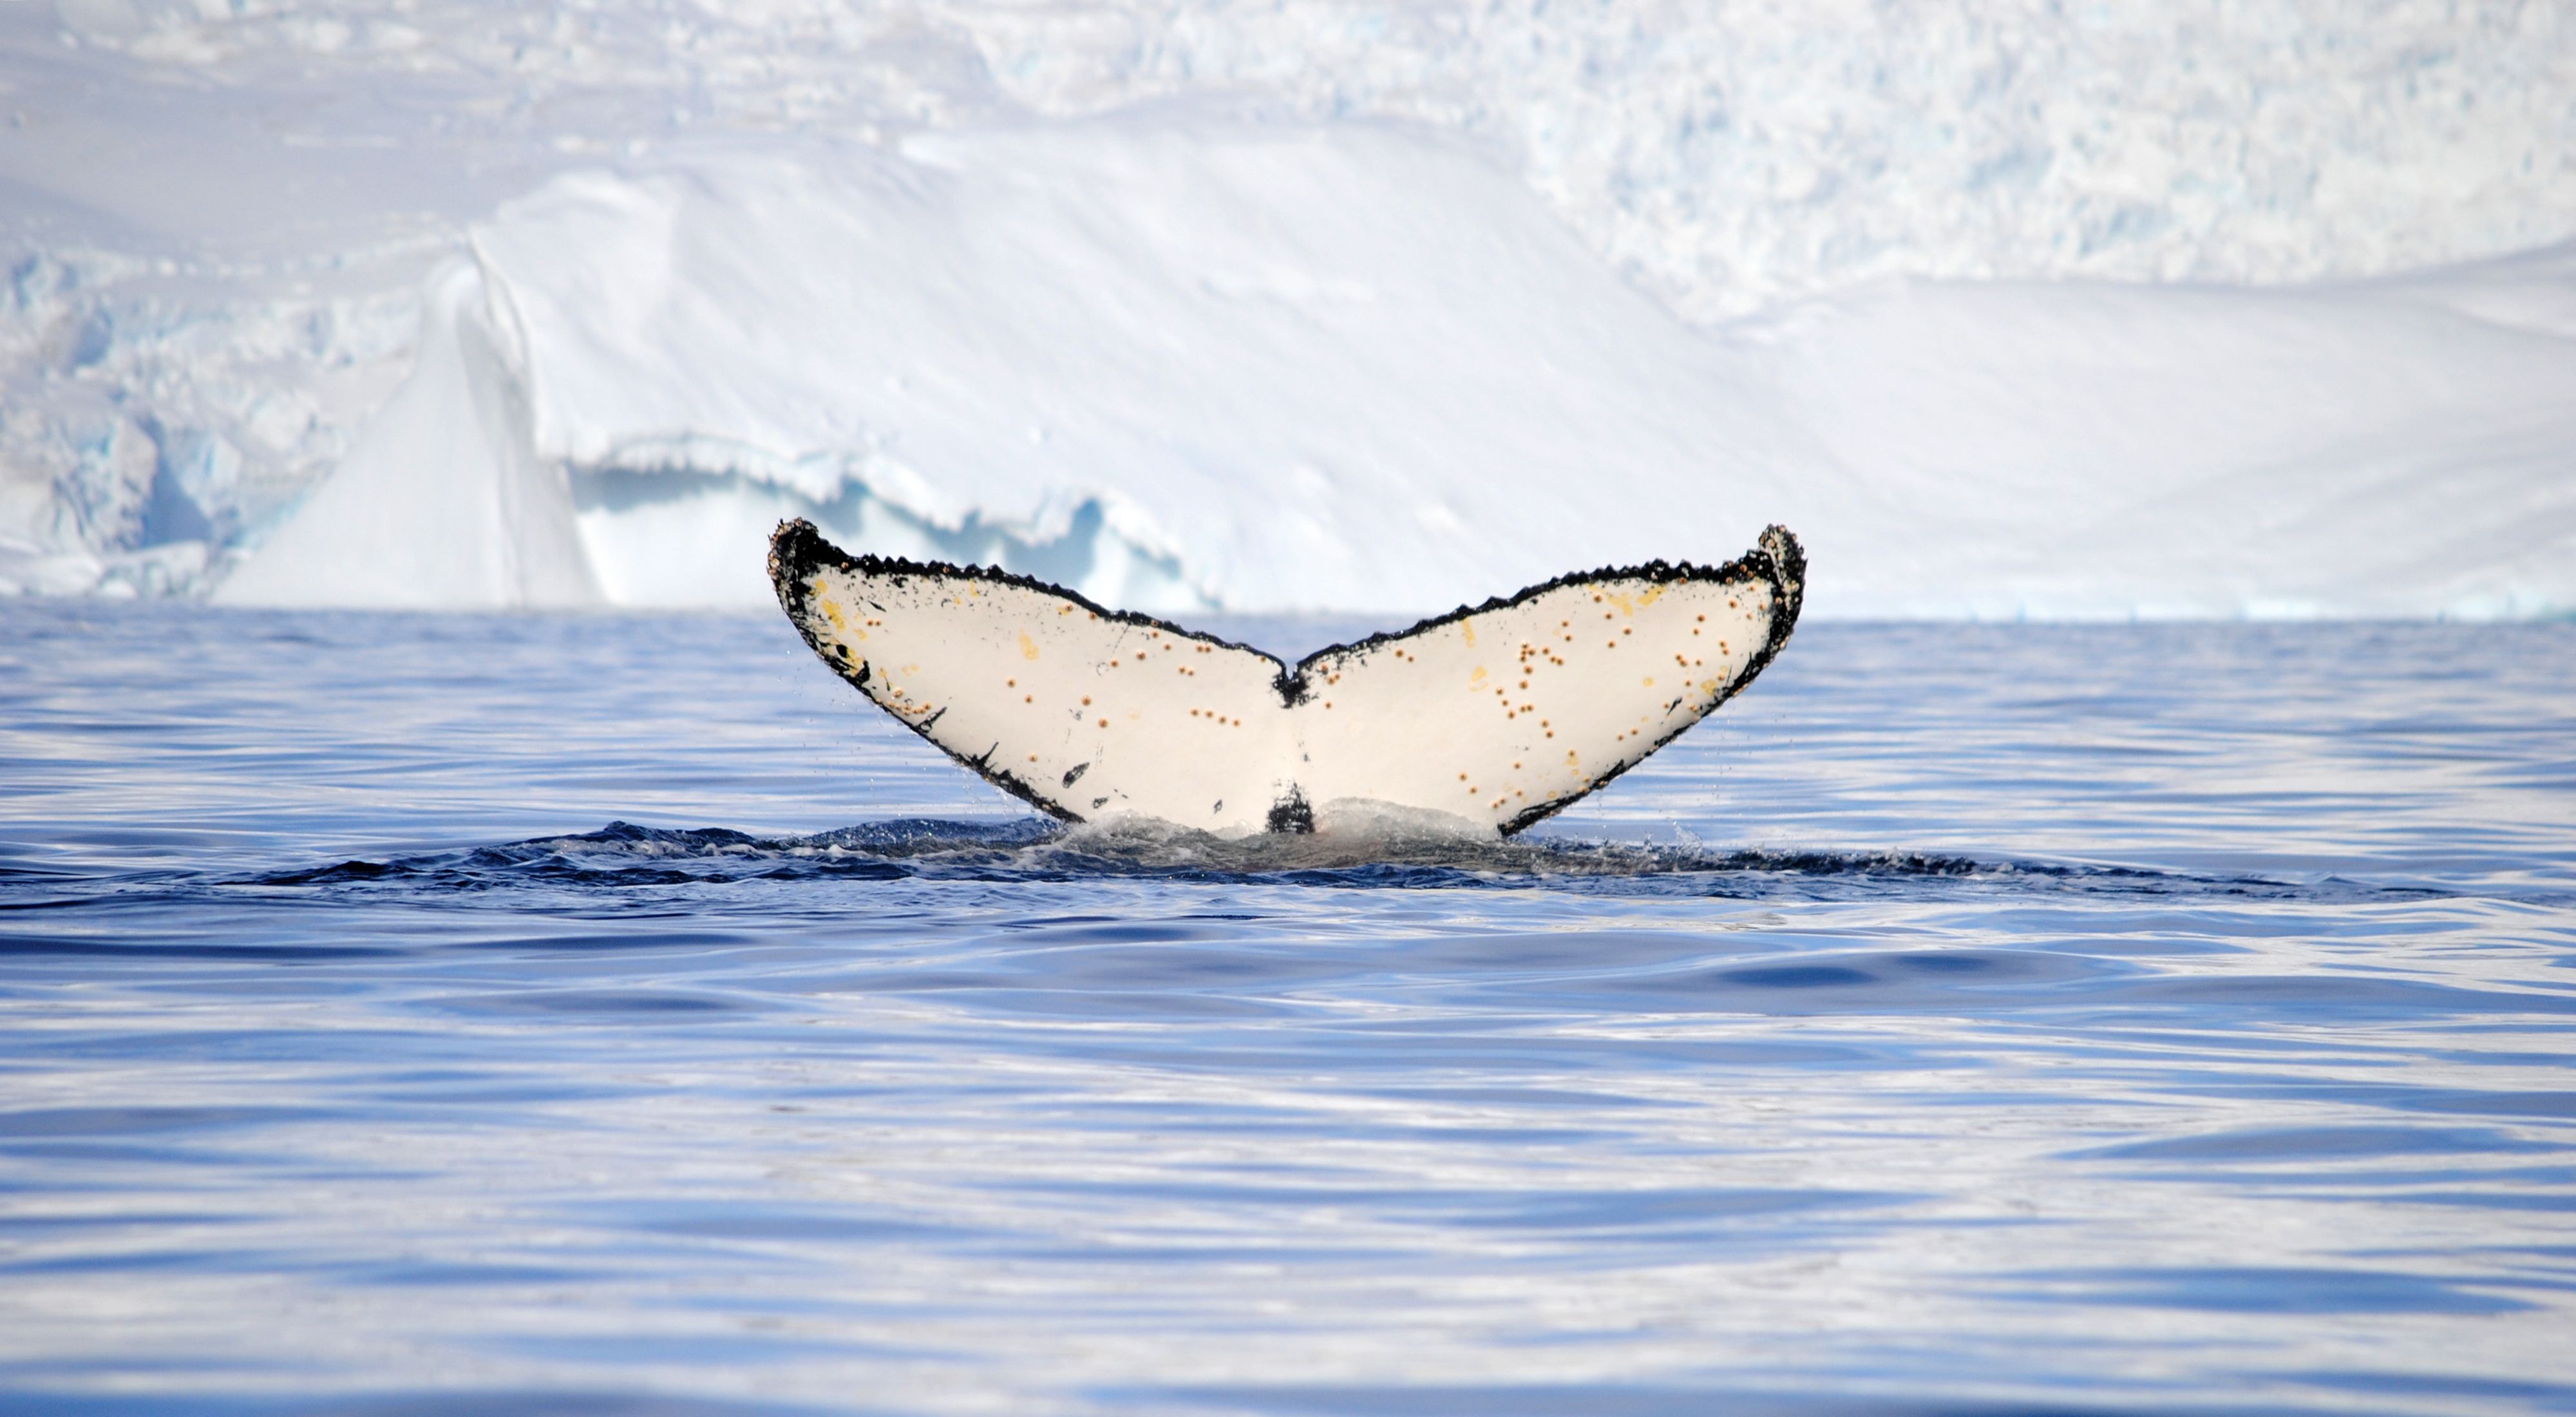 A whale descends into the icy Antarctic waters, where Dr. James McClintock has been researching climate issues for 20 years.